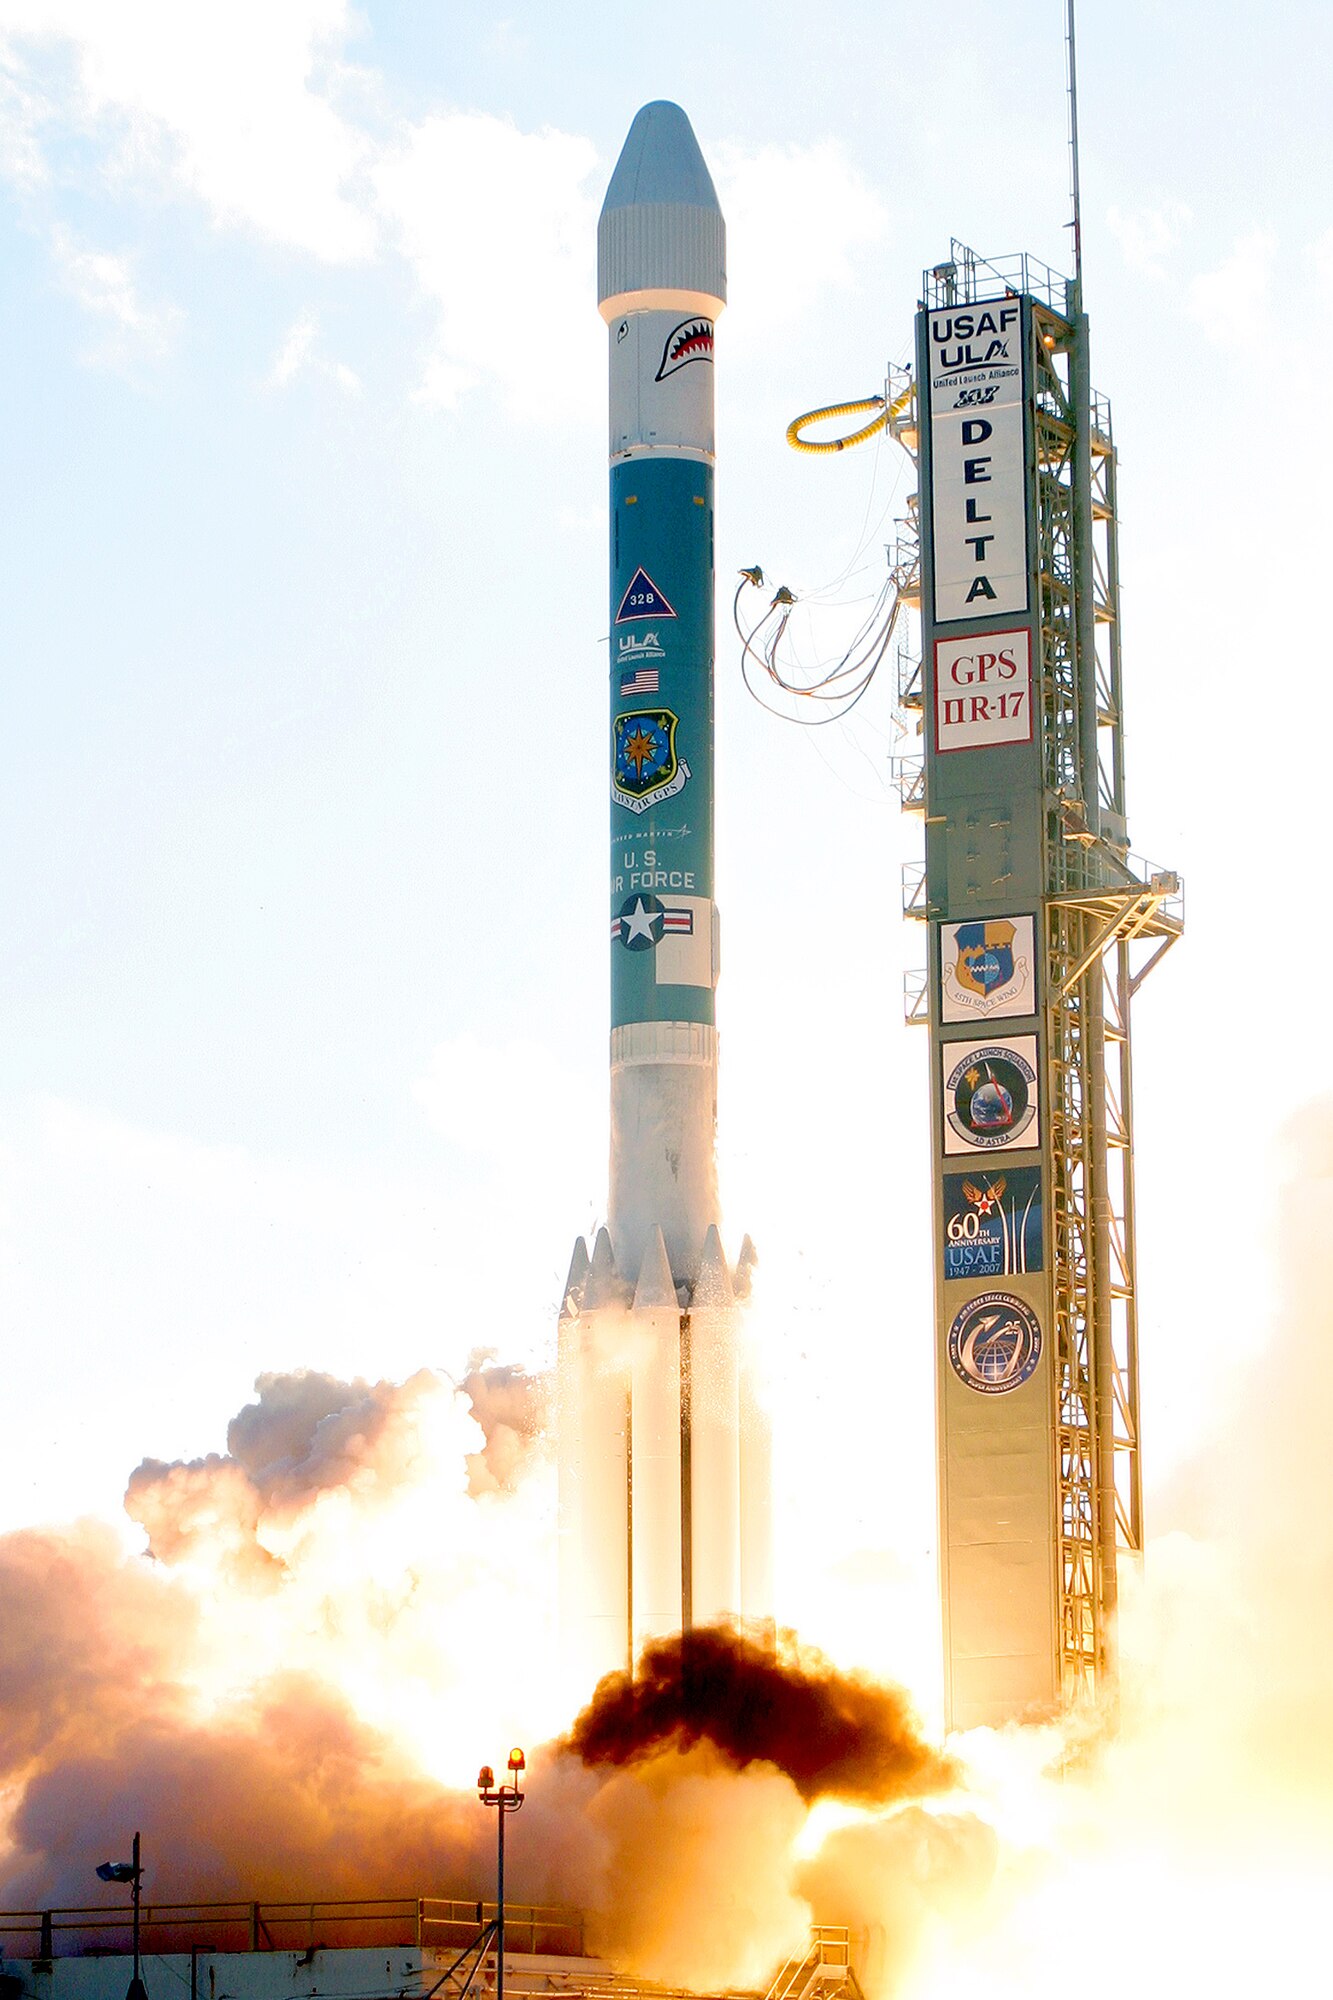 CAPE CANAVERAL AIR FORCE STATION, Fla. -- The U.S. Air Force successfully launched a United Launch Alliance Delta II booster carrying the fourth modernized GPS satellite into space Oct. 17 8:23 a.m. (EDT) from Space Launch Complex 17A here. (Courtesy photo) 